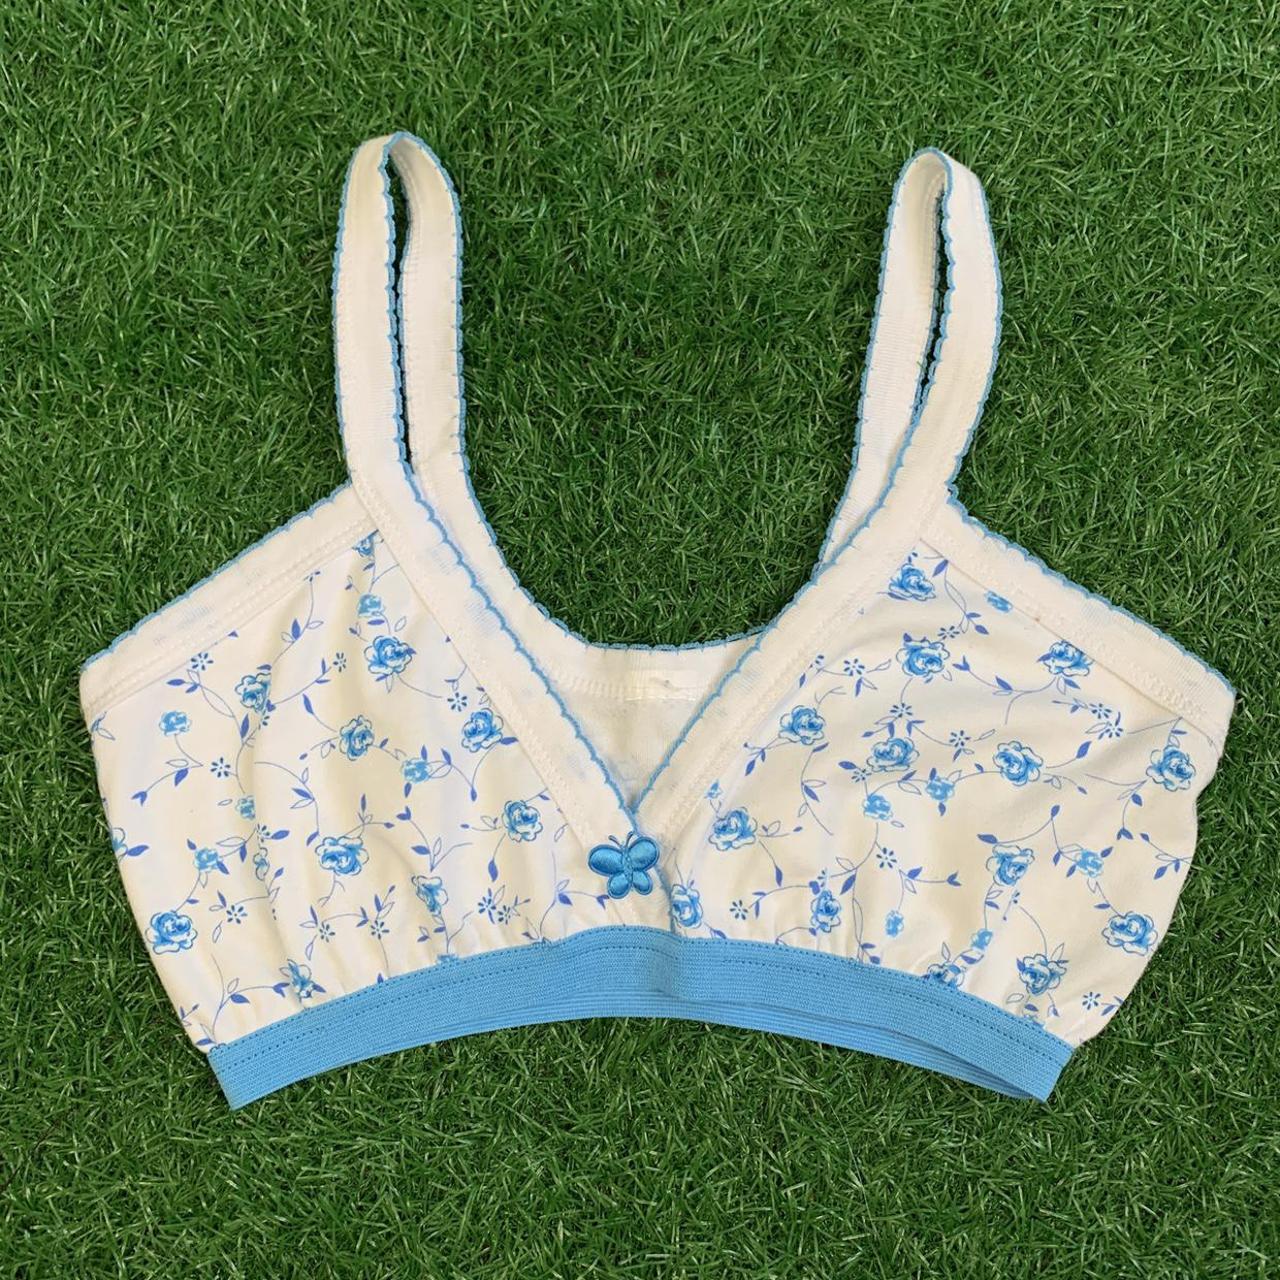 Product Image 1 - Adorable White & Blue Floral